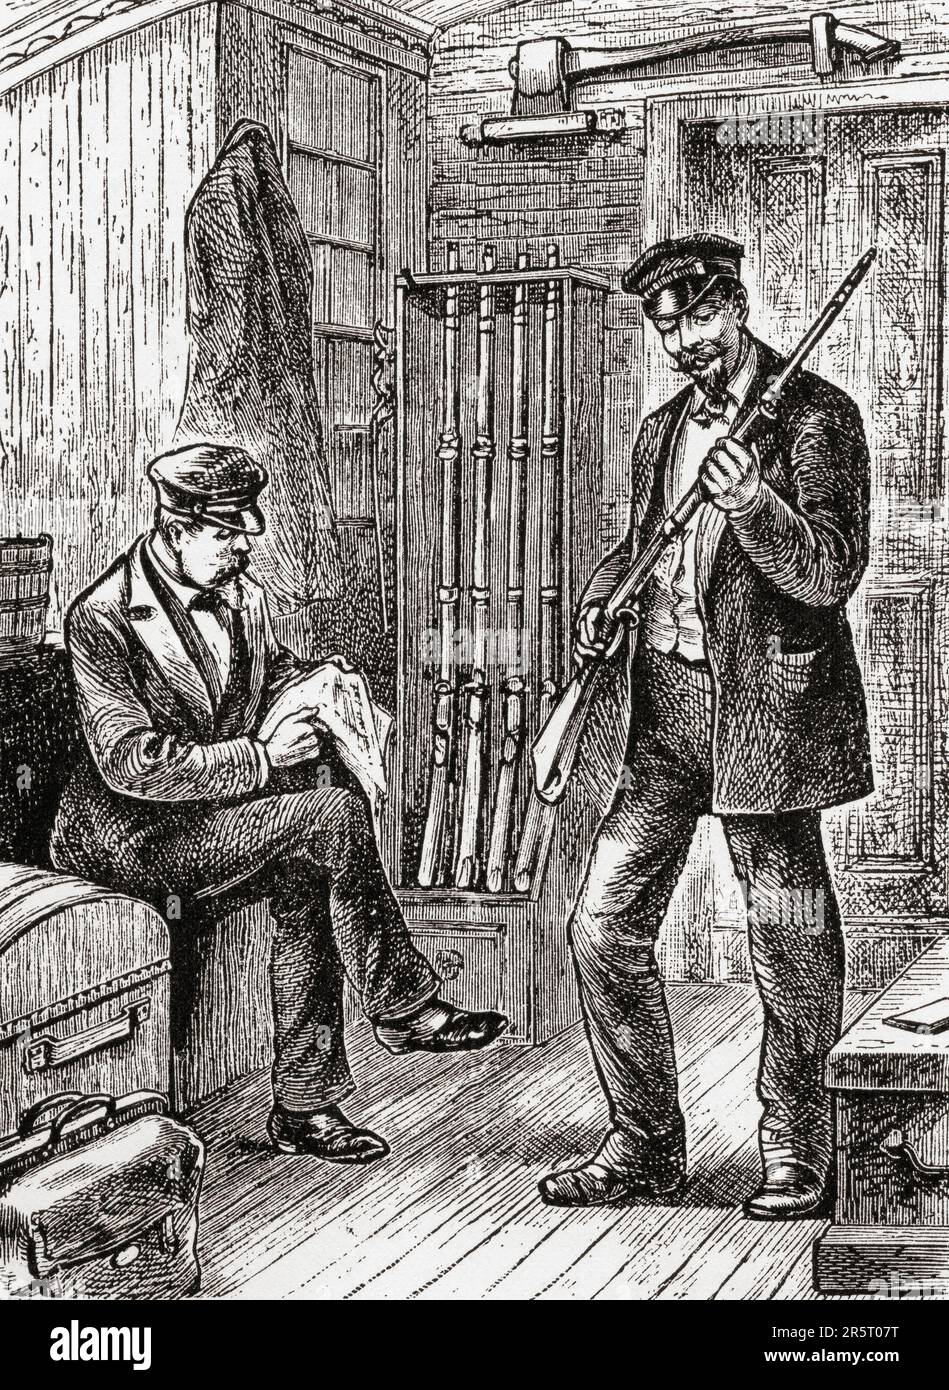 The baggage master's armoury, aboard the train to Atlanta, Georgia, USA, 19th century.  Presumably the railroad baggage master needed weapons to protect the passenger's baggage from theft.  From America Revisited: From The Bay of New York to The Gulf of Mexico, published 1886. Stock Photo